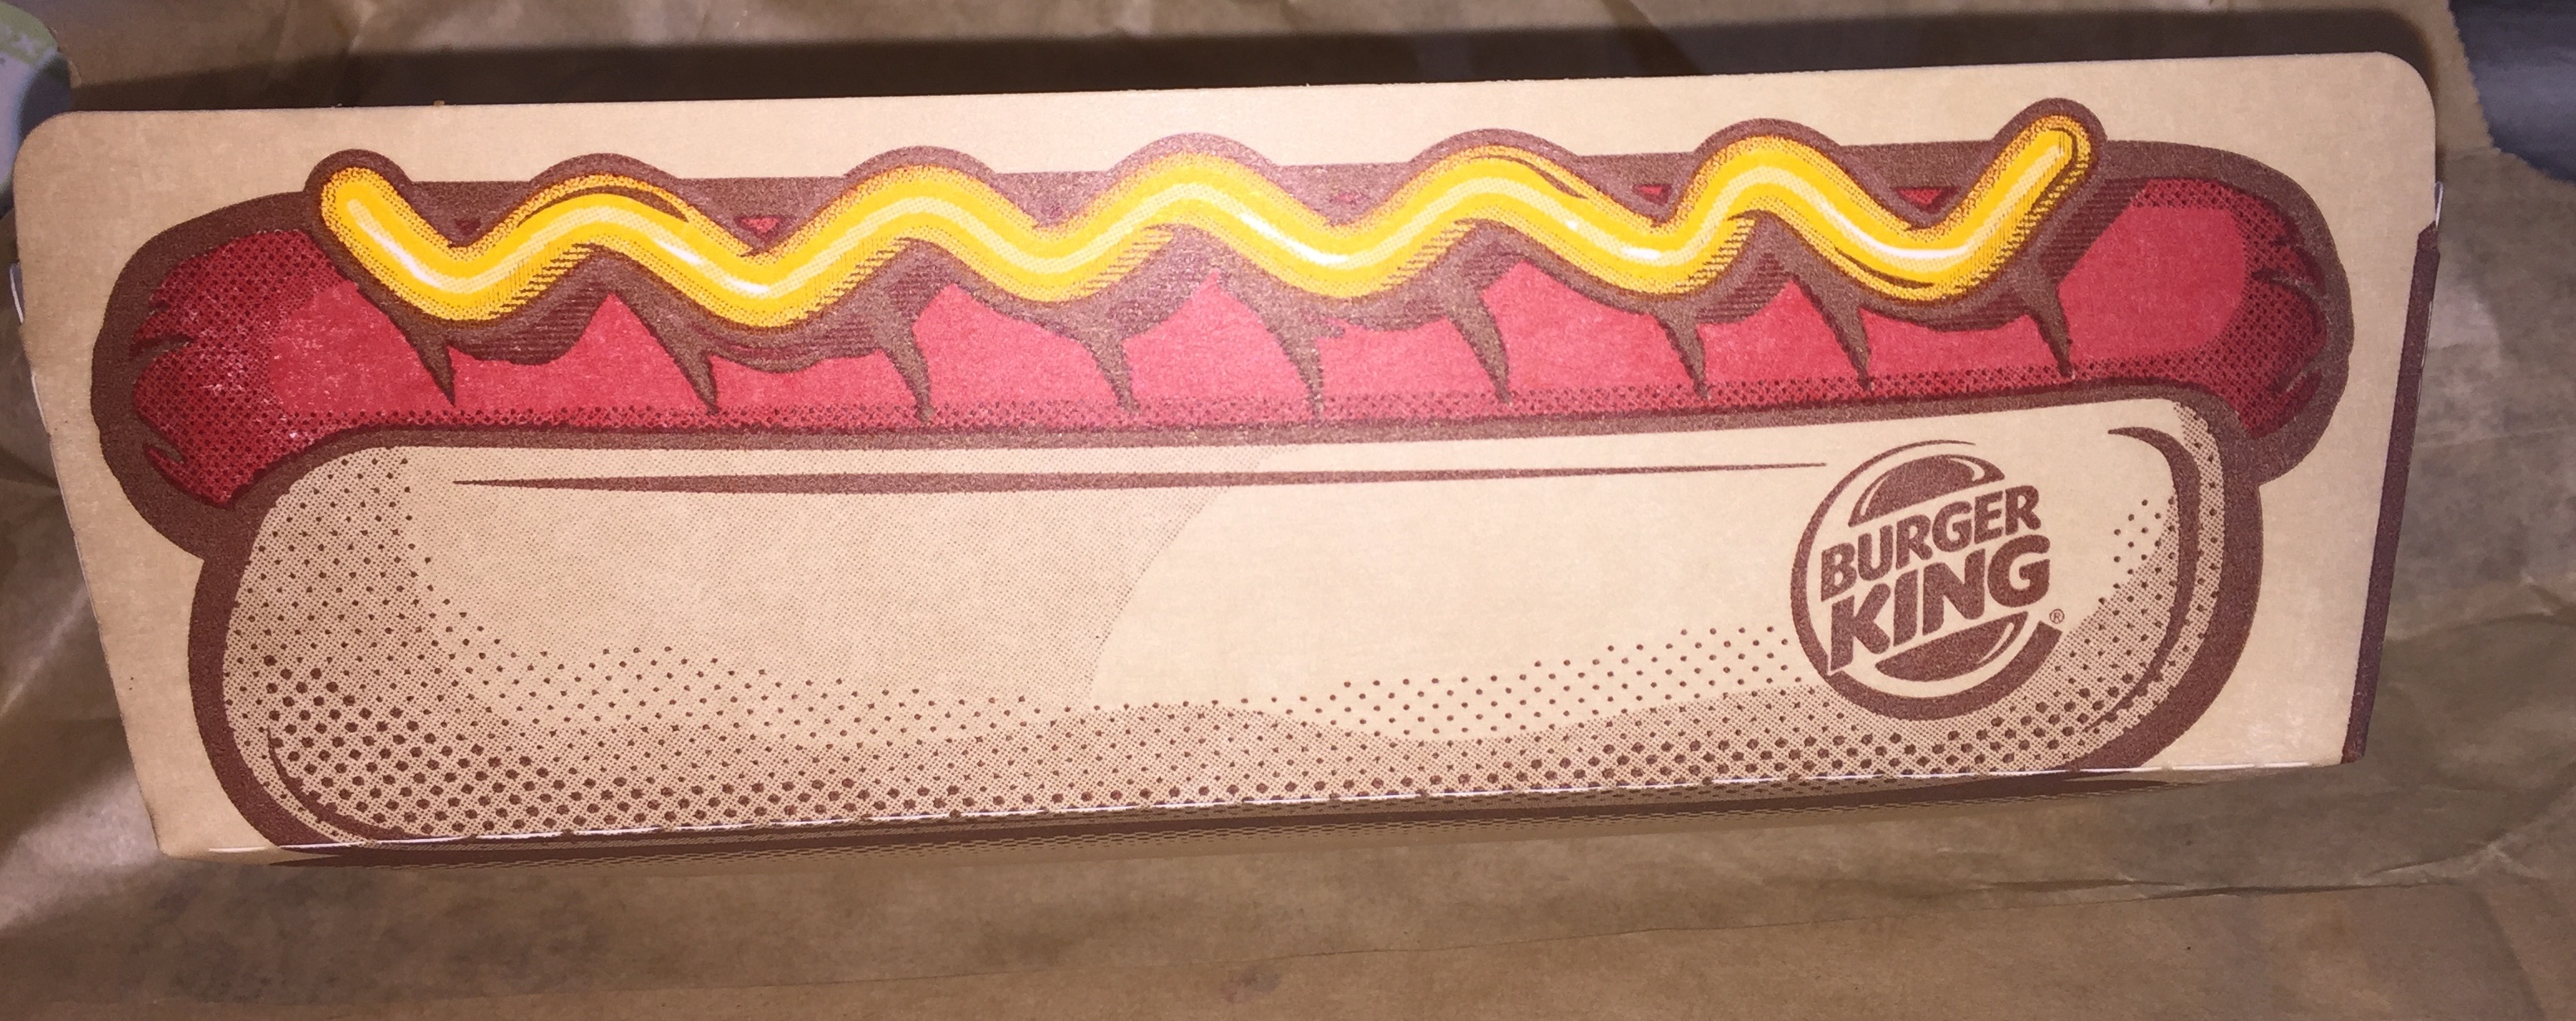 Even the packaging illustrated a hot dog larger than the bun !  This FRAUD RUNS DEEP !